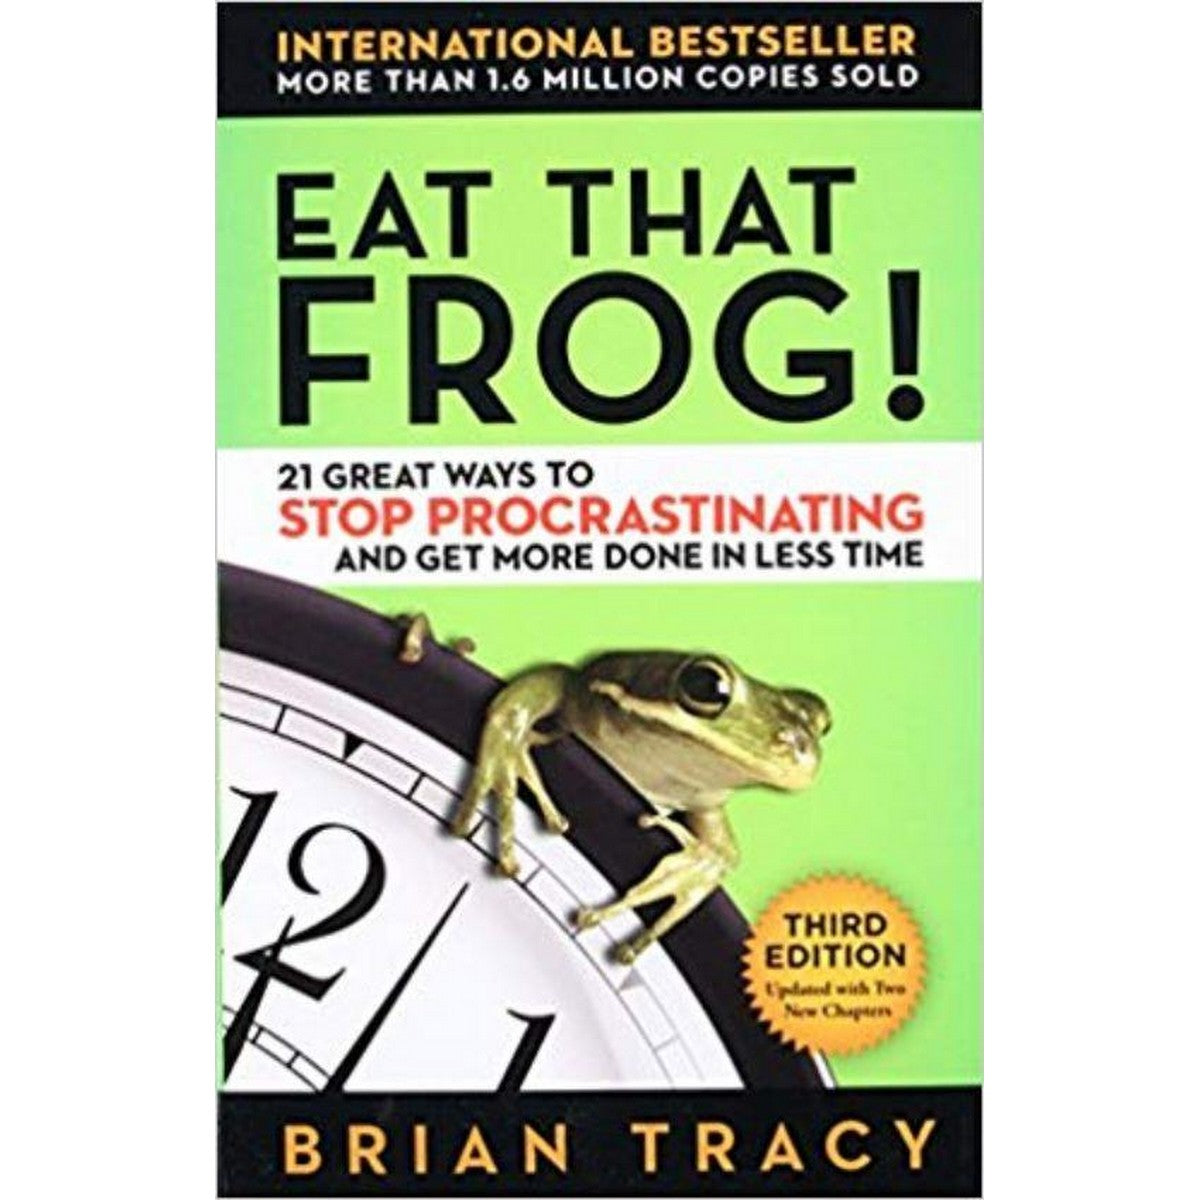 Eat That Frog by Brian Tracy (book)